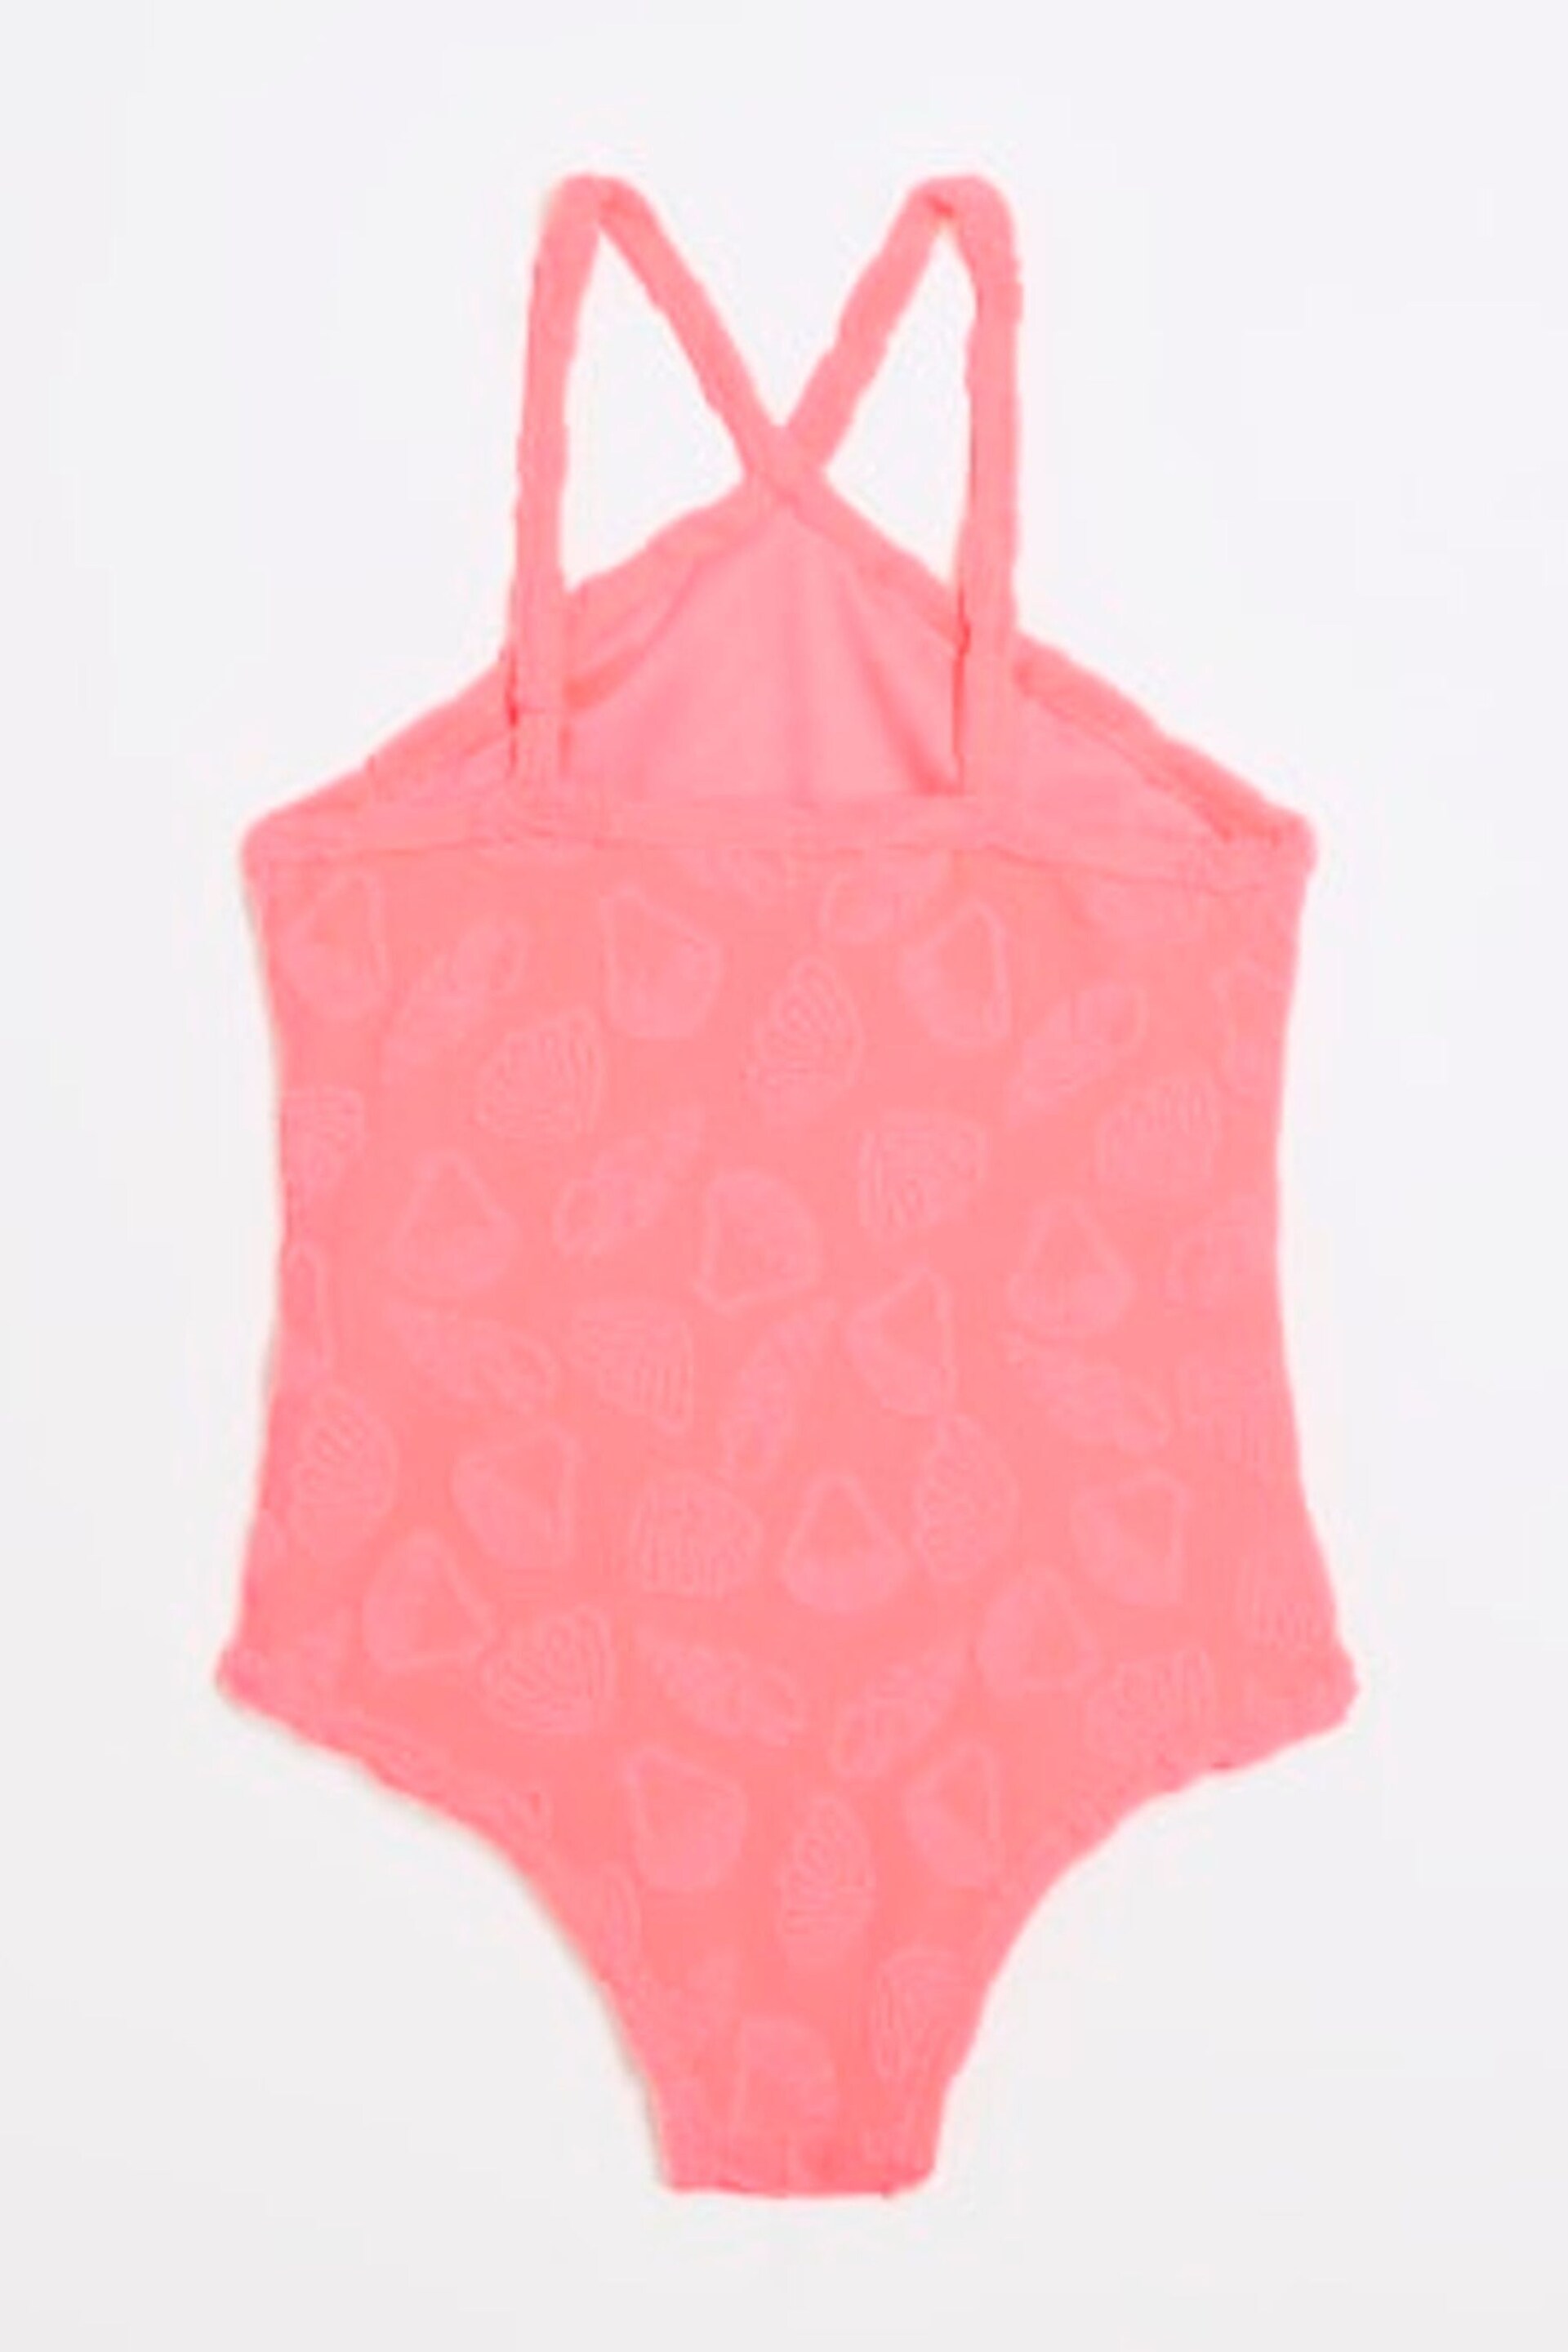 River Island Pink Girls Towelling Halter Swimsuit - Image 2 of 4